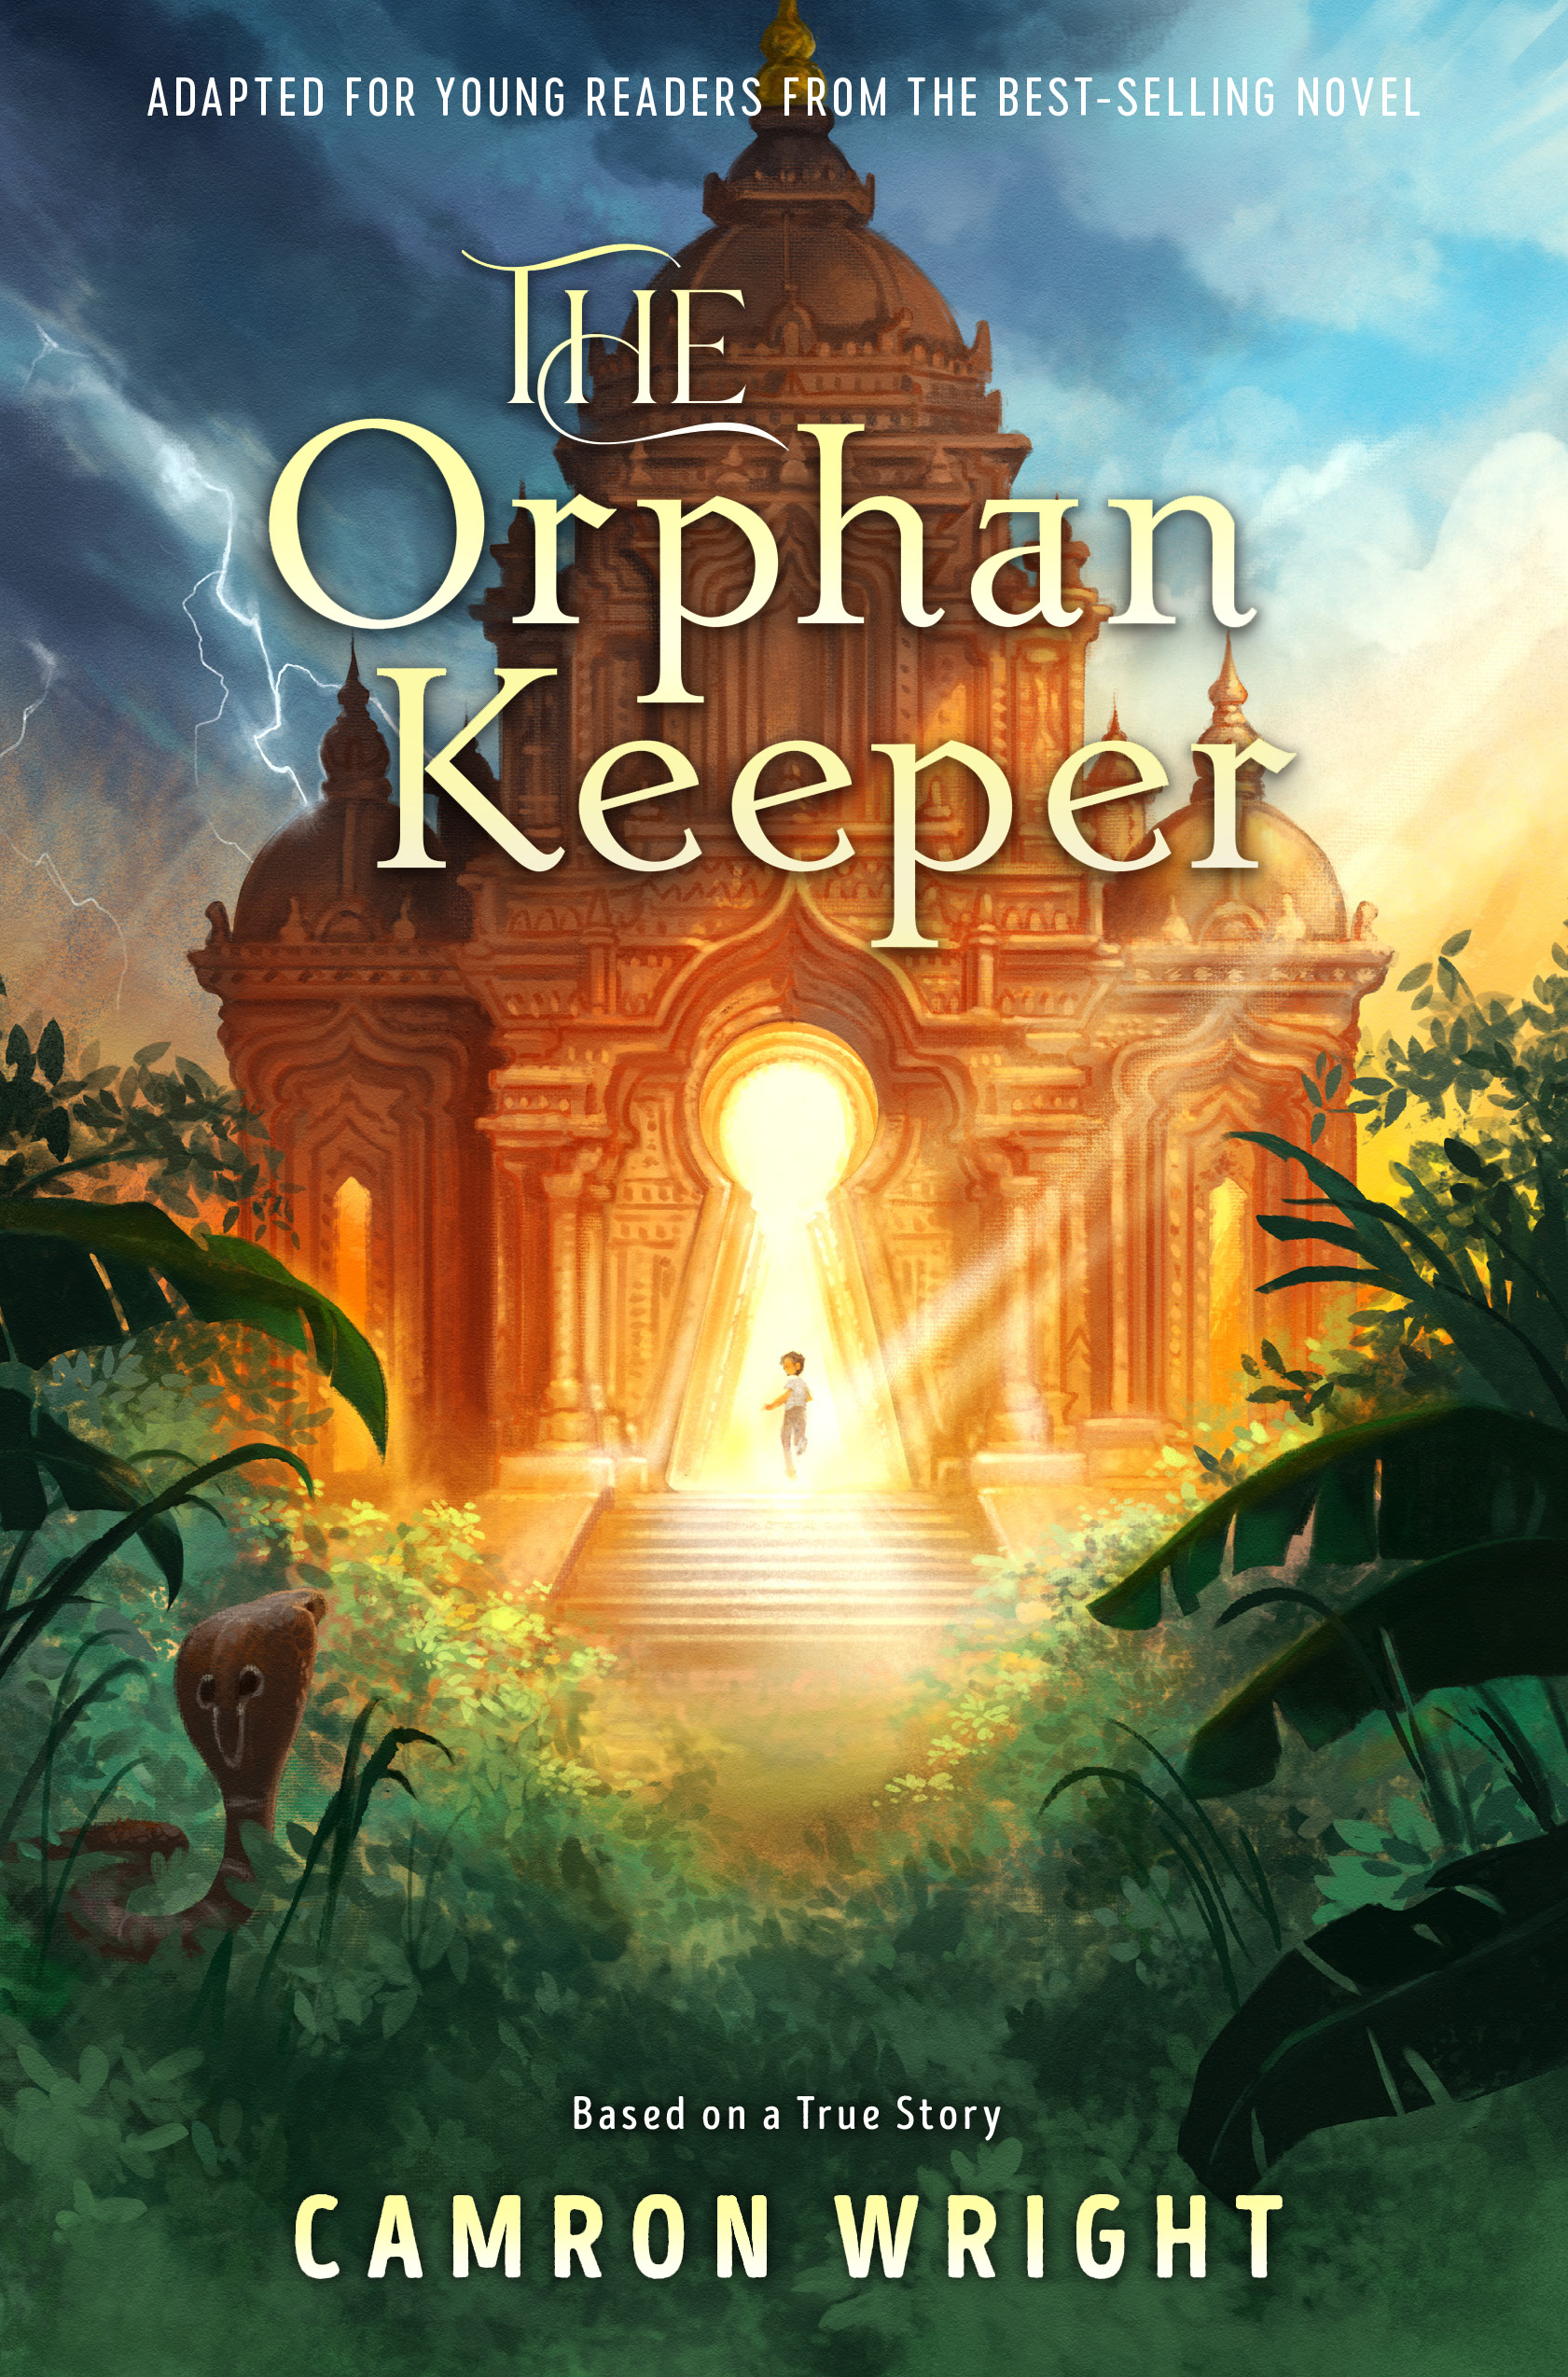 The Orphan Keeper Adapted For Young Readers by Camron Wright